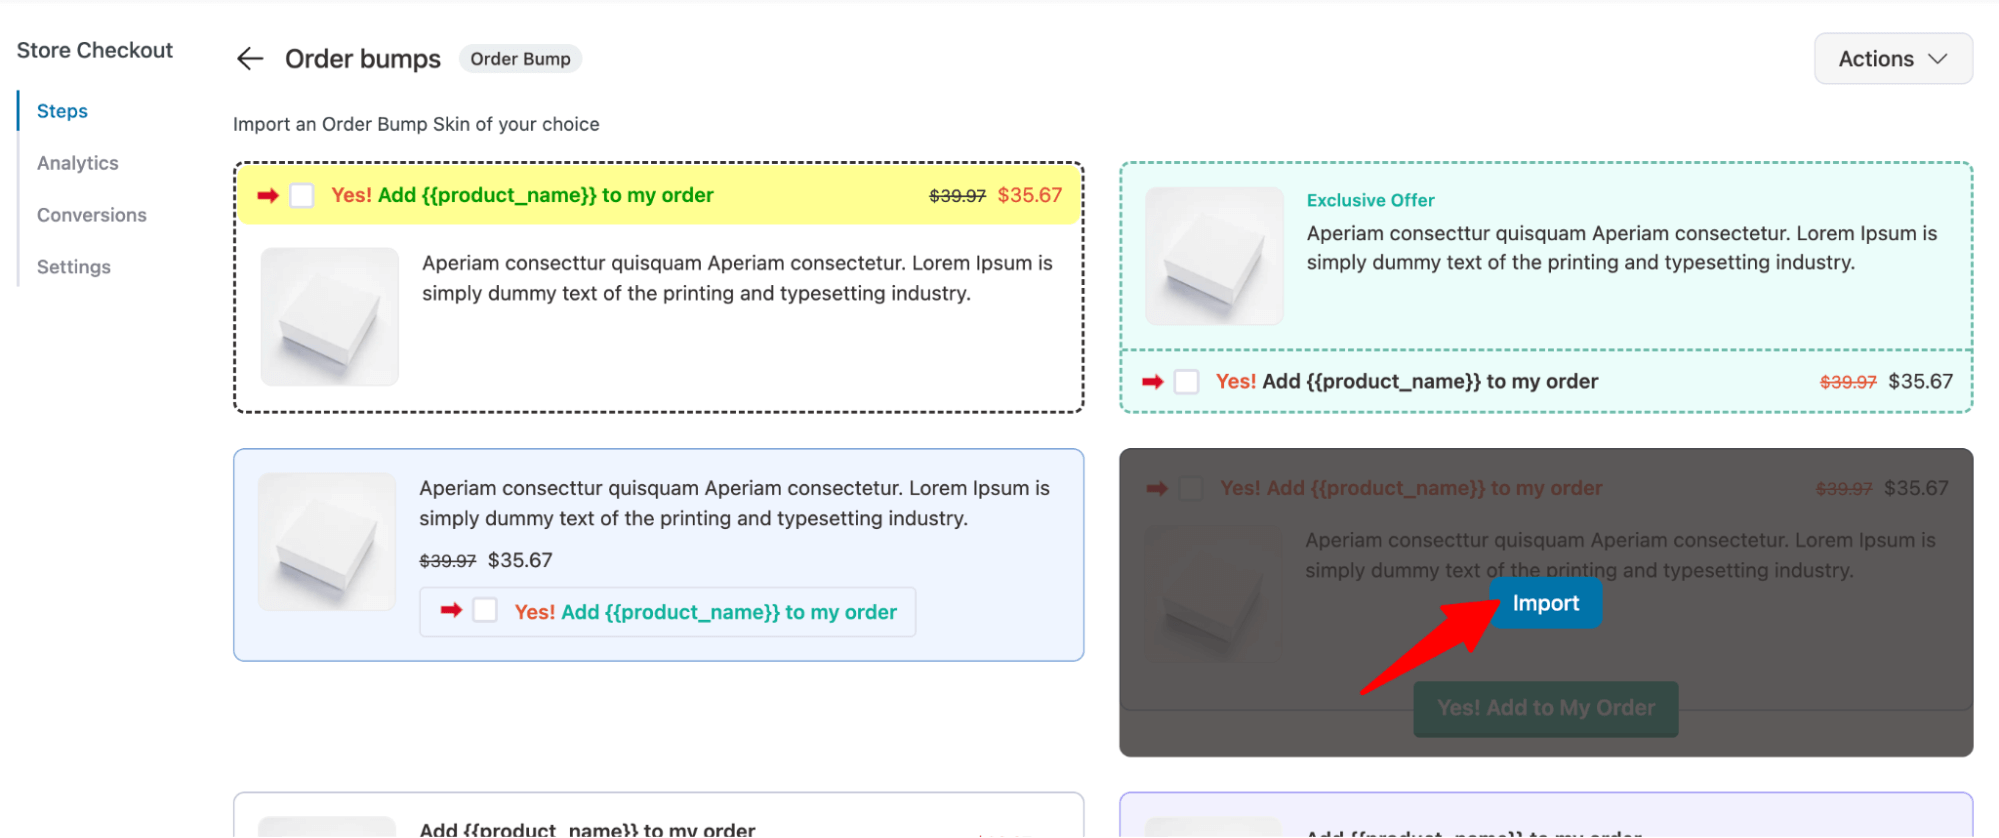 click on import order bump for featured product